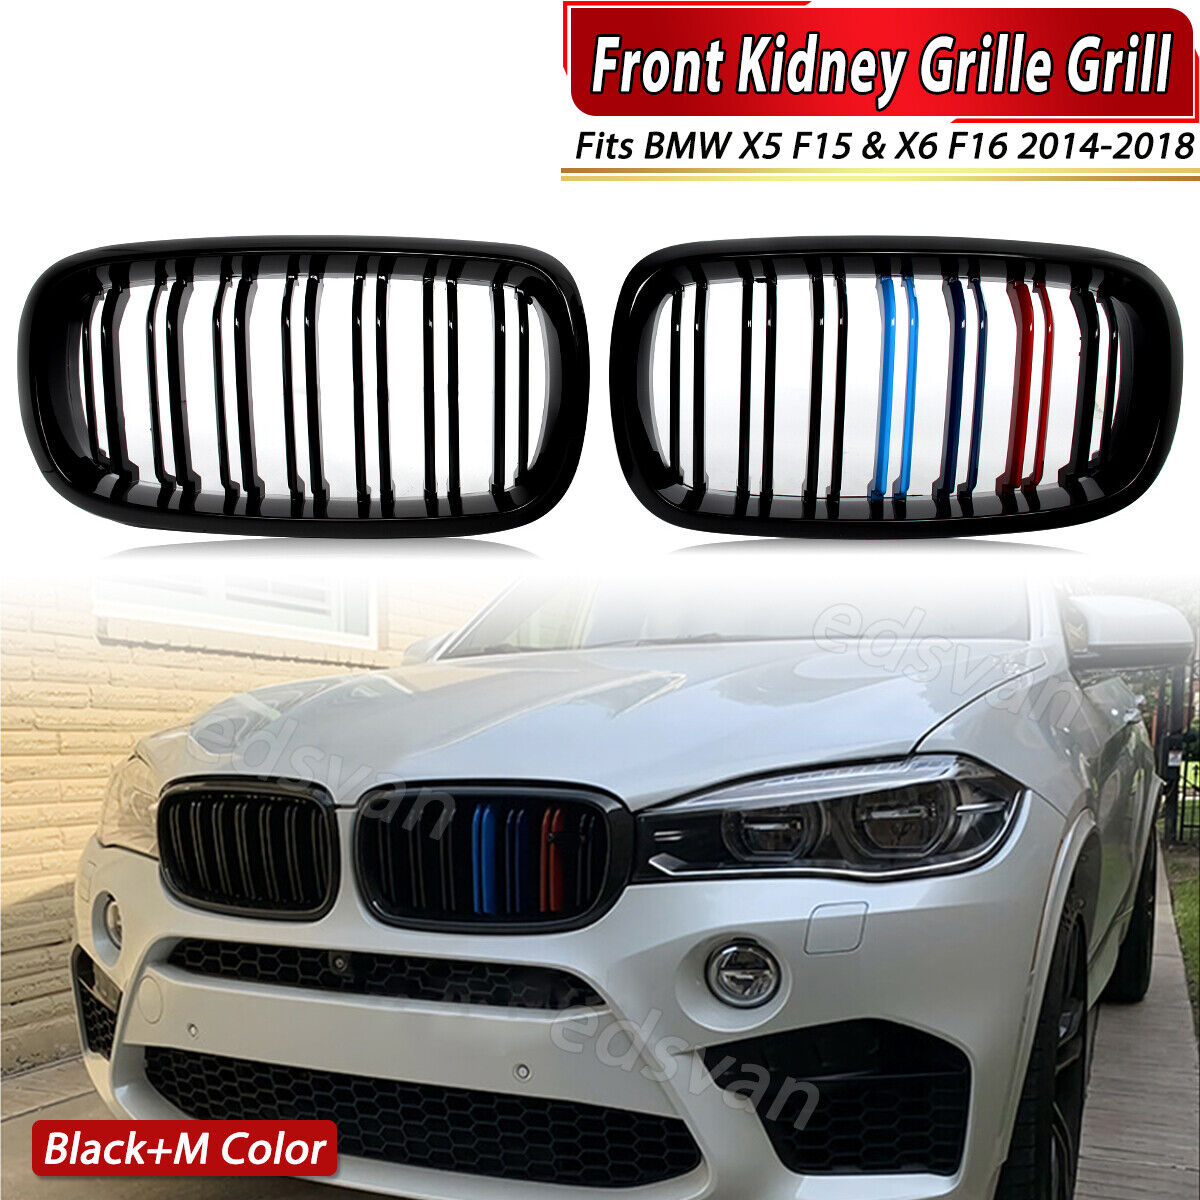 2X M-Color Front Kidney Grille Grill For BMW X5 F15 X6 F16 2014-2018 Gloss Black